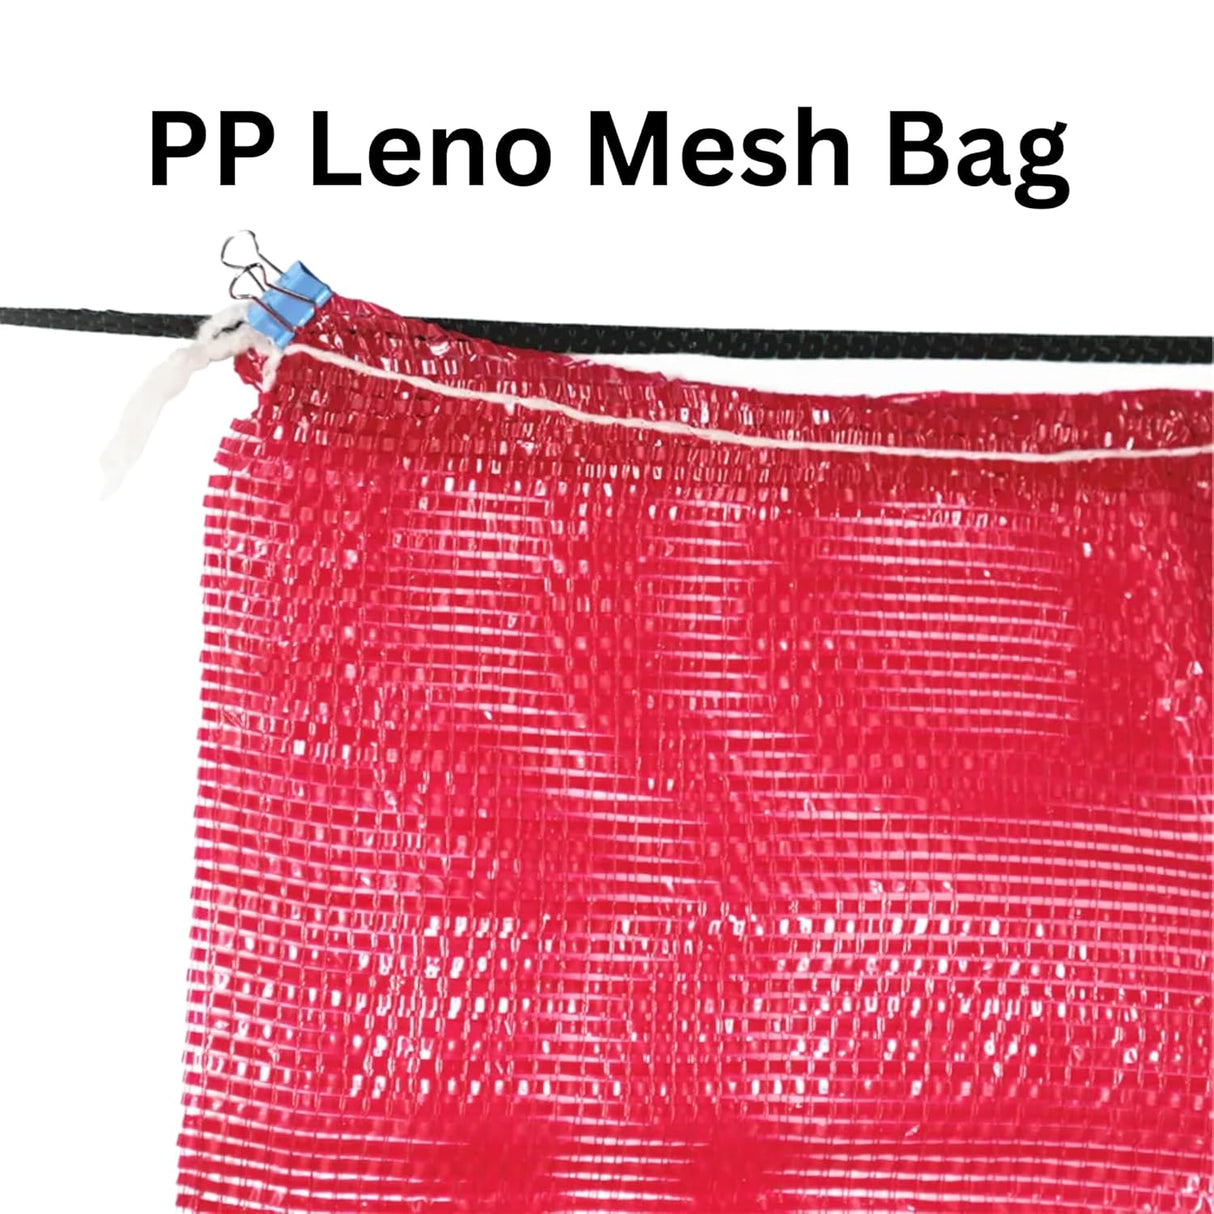 Singhal PP Mesh Storage Bags 22x40 Inch with Drawstring, Magenta (Rani Pink) Color | upto 40kg capacity Great for Packaging Produce, Vegetables and Fruit | Multipurpose Bora, Bori (10)